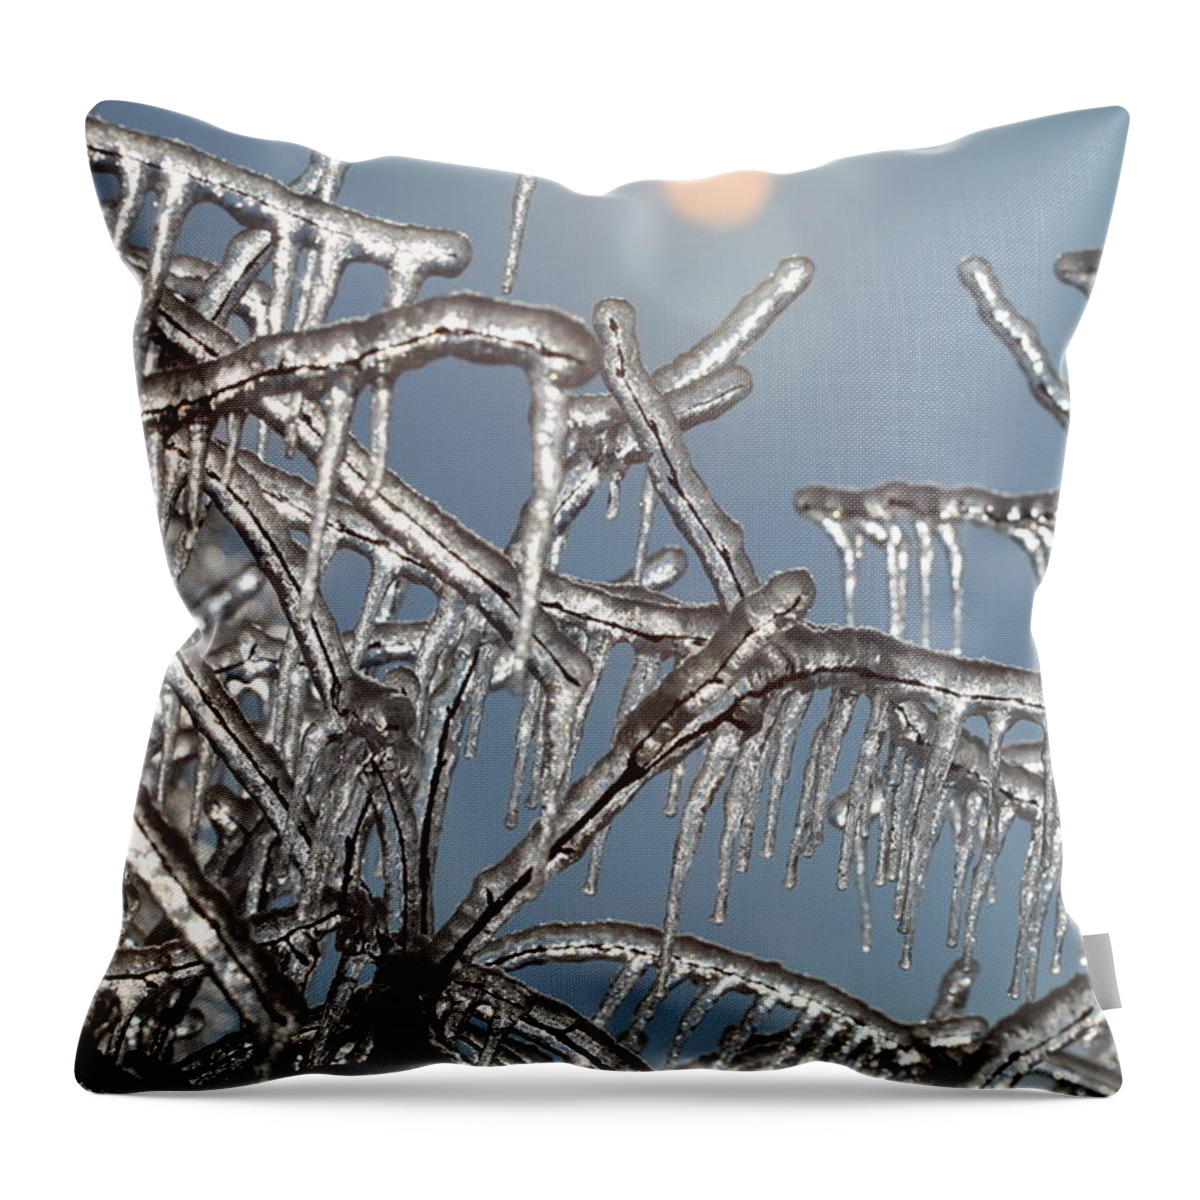 Winter Throw Pillow featuring the photograph Winter Warmth by Nadine Rippelmeyer